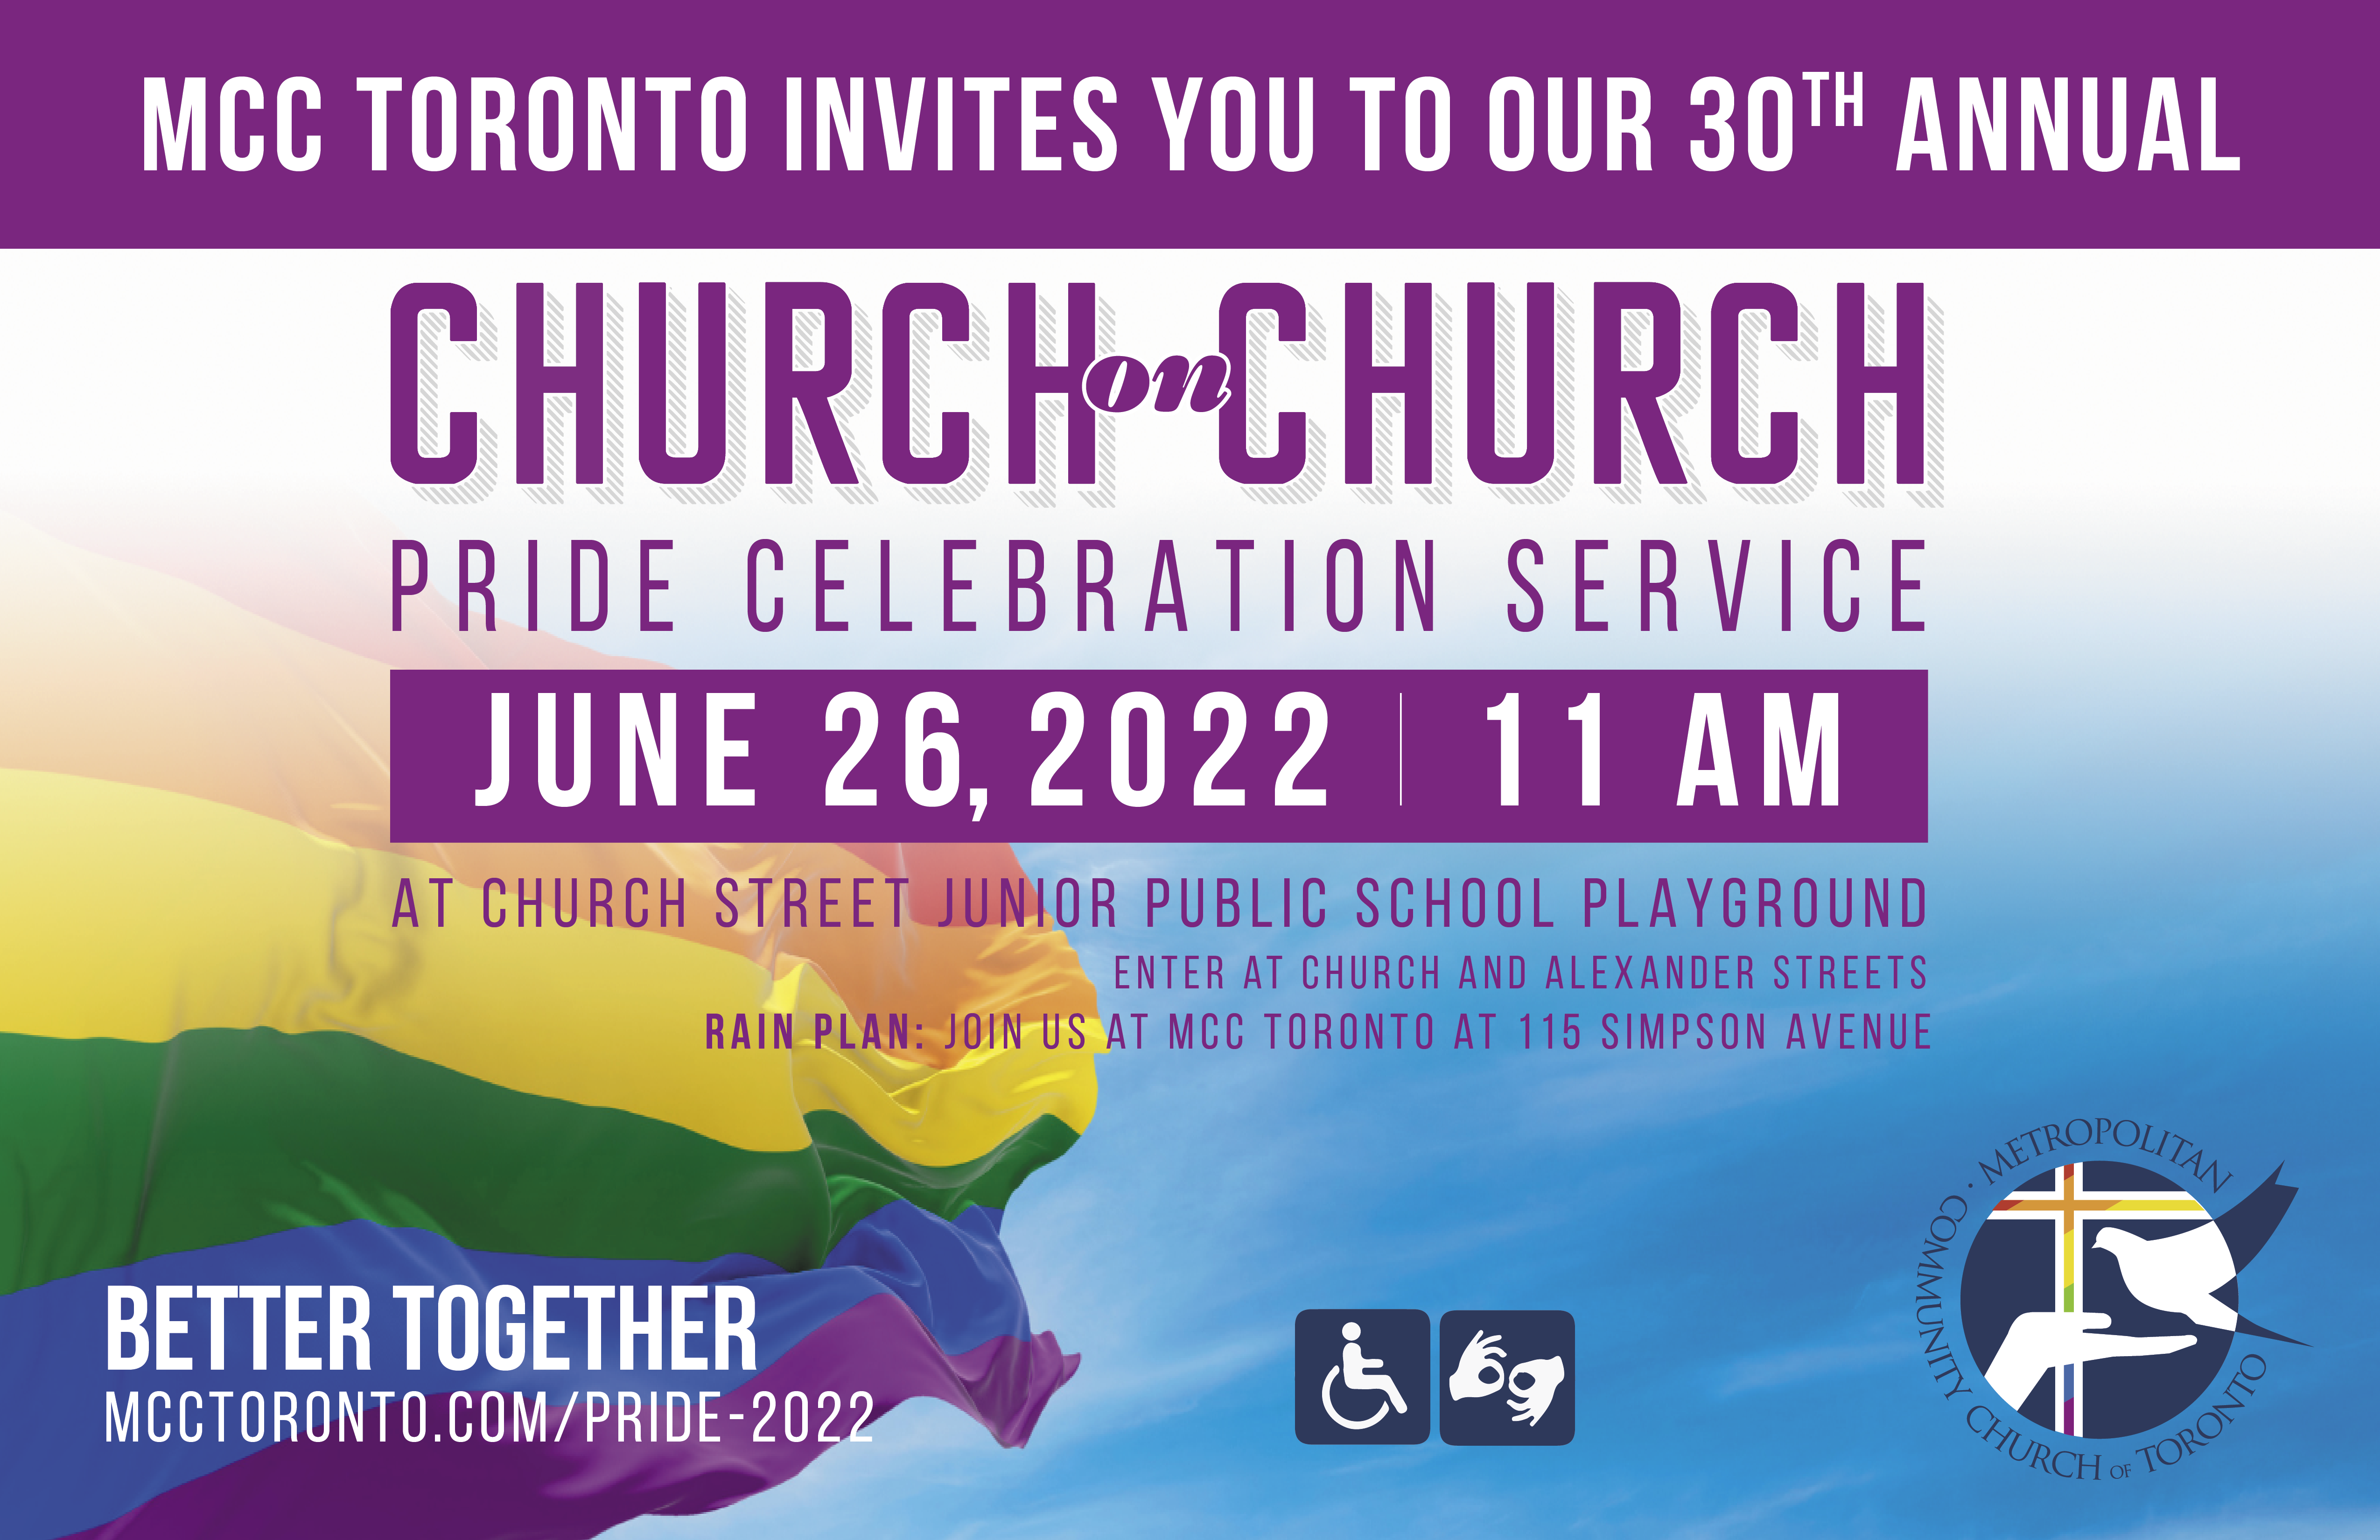 An image of Pride Flag, over a background image of a blue sky with the text saying: 'MCC TORONTO INVITES YOU TO OUR 30TH ANNUAL CHURCH ON CHURCH PRIDE CELEBRATION SERVICE - JUNE 26, 26, 2022 11 AM - AT CHURCH STREET JUNIOR PUBLIC SCHOOL PLAYGROUND ENTER AT CHURCH AND ALEXANDER STREETS JOINUSAT MCC TORONTO AT 115 SIMPSON AVENUE METROPOLITAN CONN CHNGH-TOROND CHURCHO TORONTO. BETTER TOGETHER. Website: MCCTORONTO.COM/PRIDE-2022